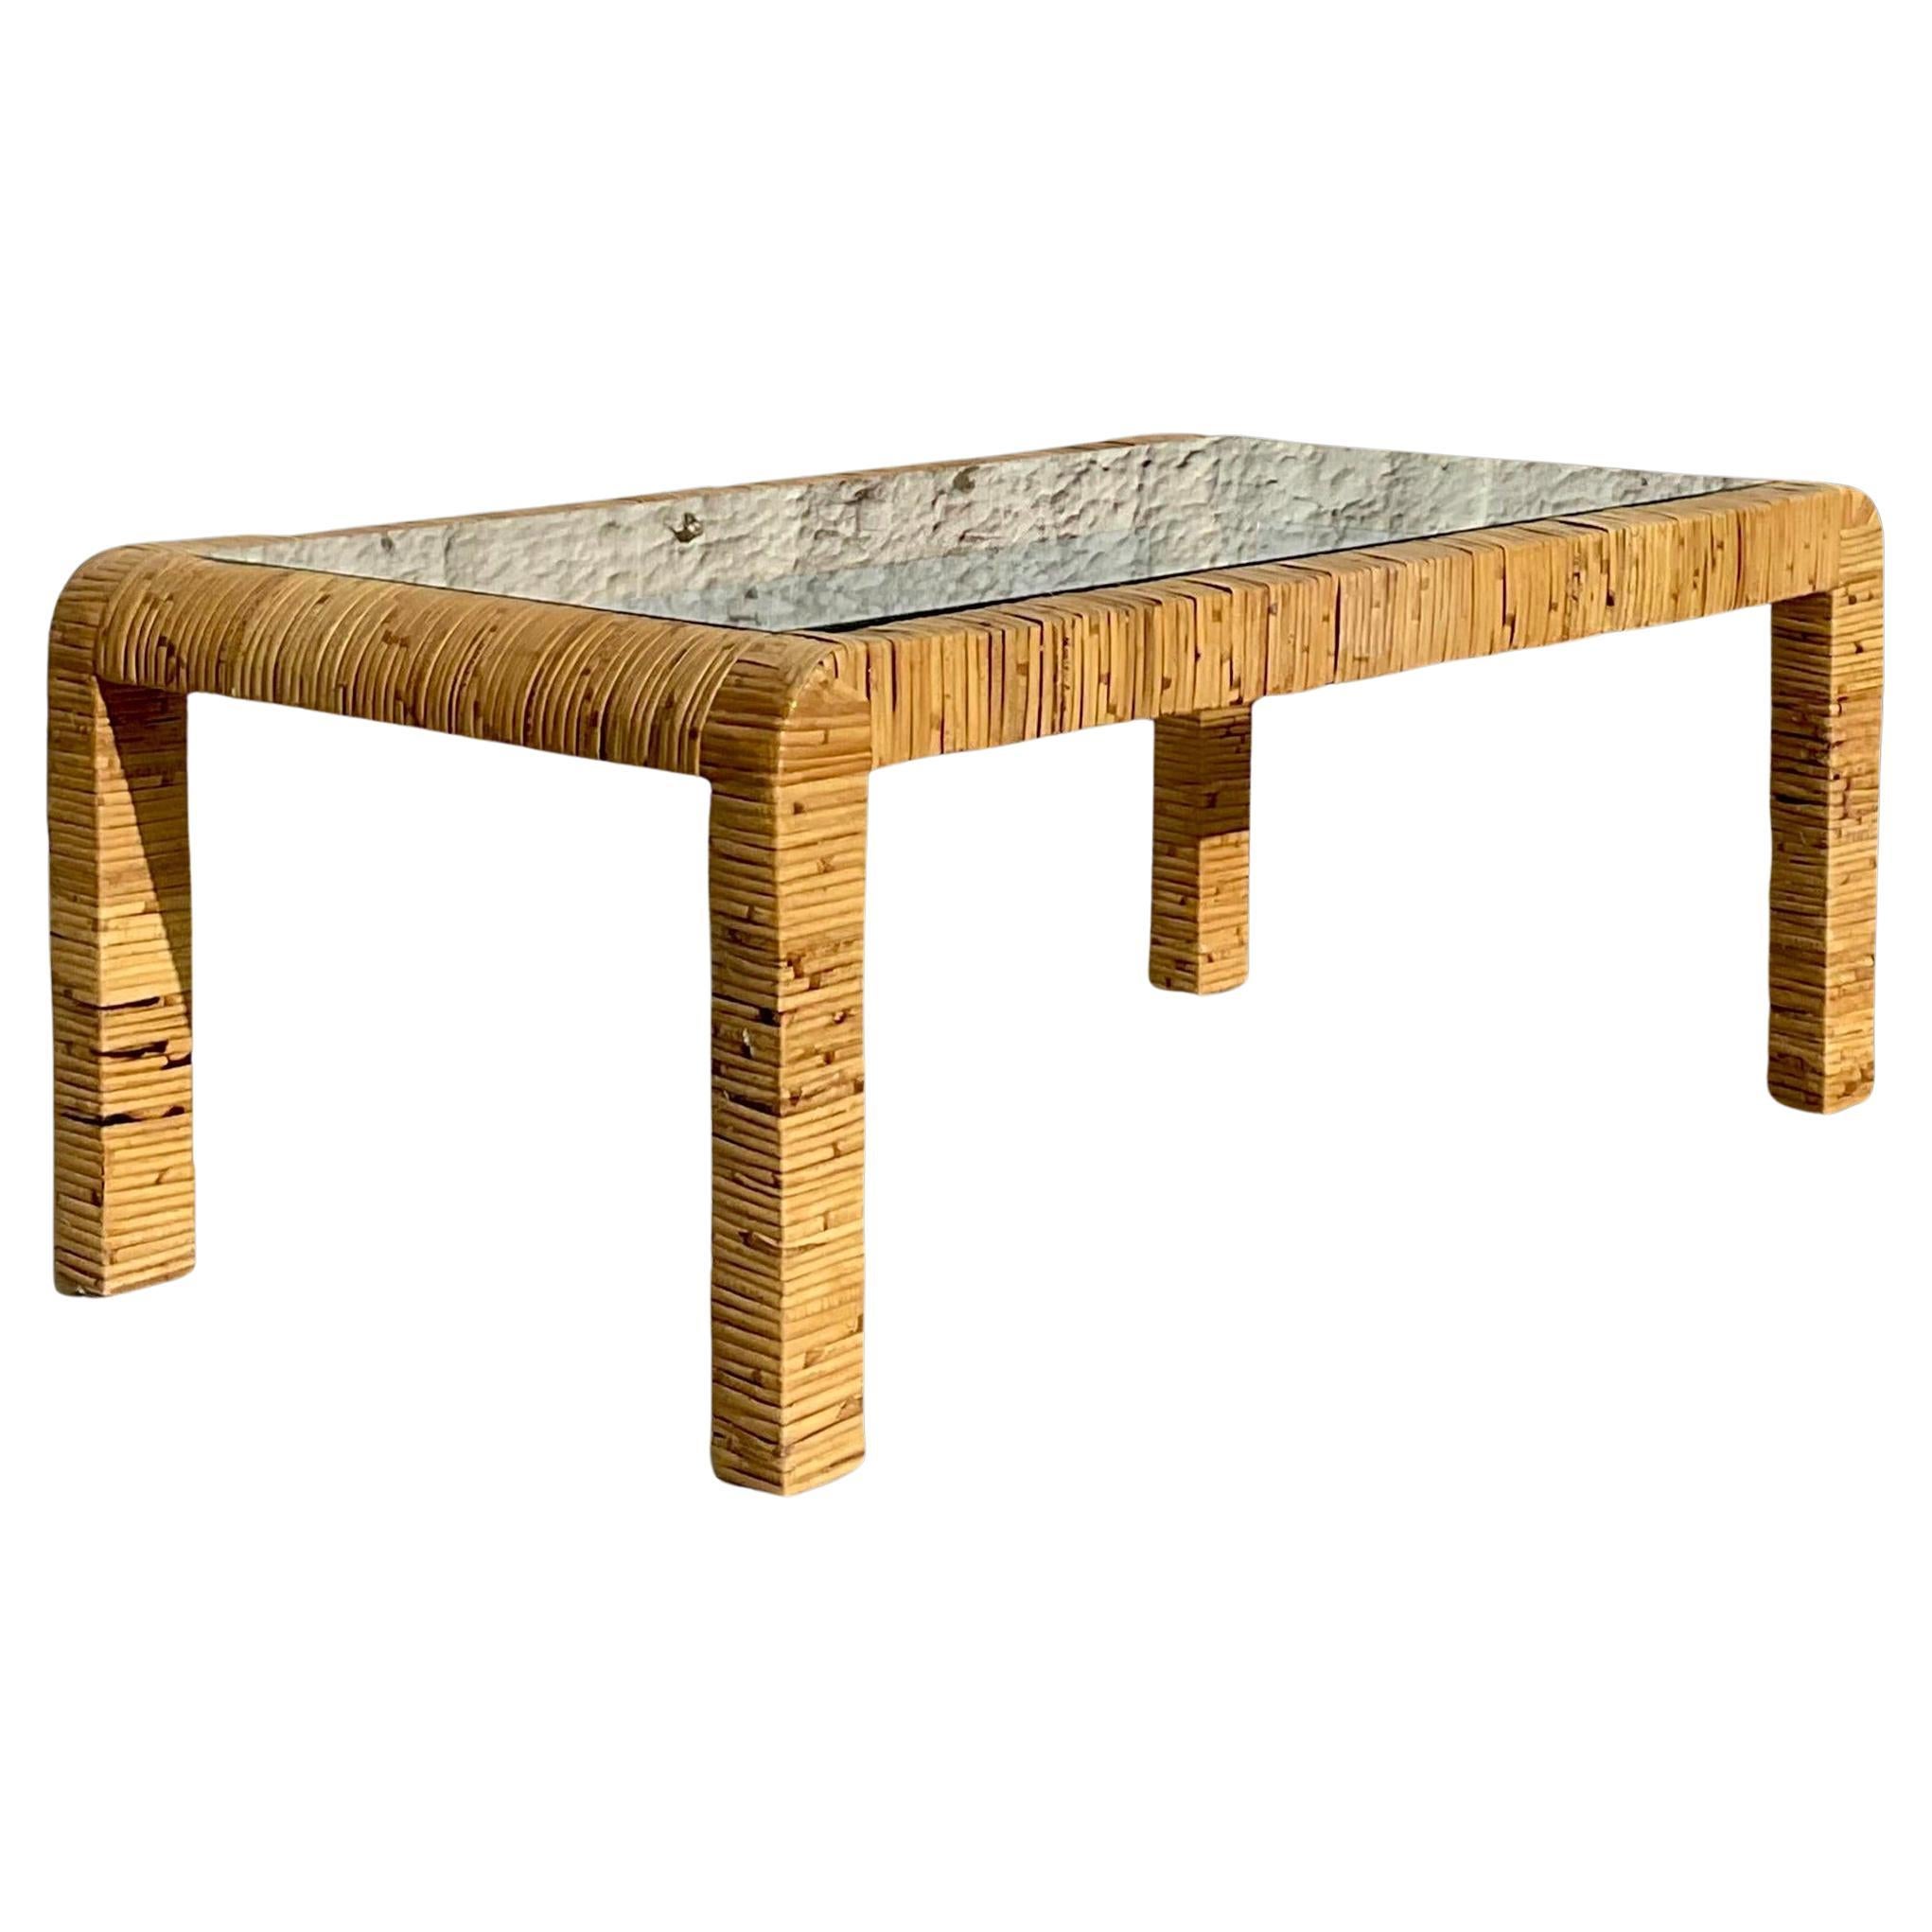 Late 20th Century Vintage Coastal Wrapped Rattan Coffee Table For Sale